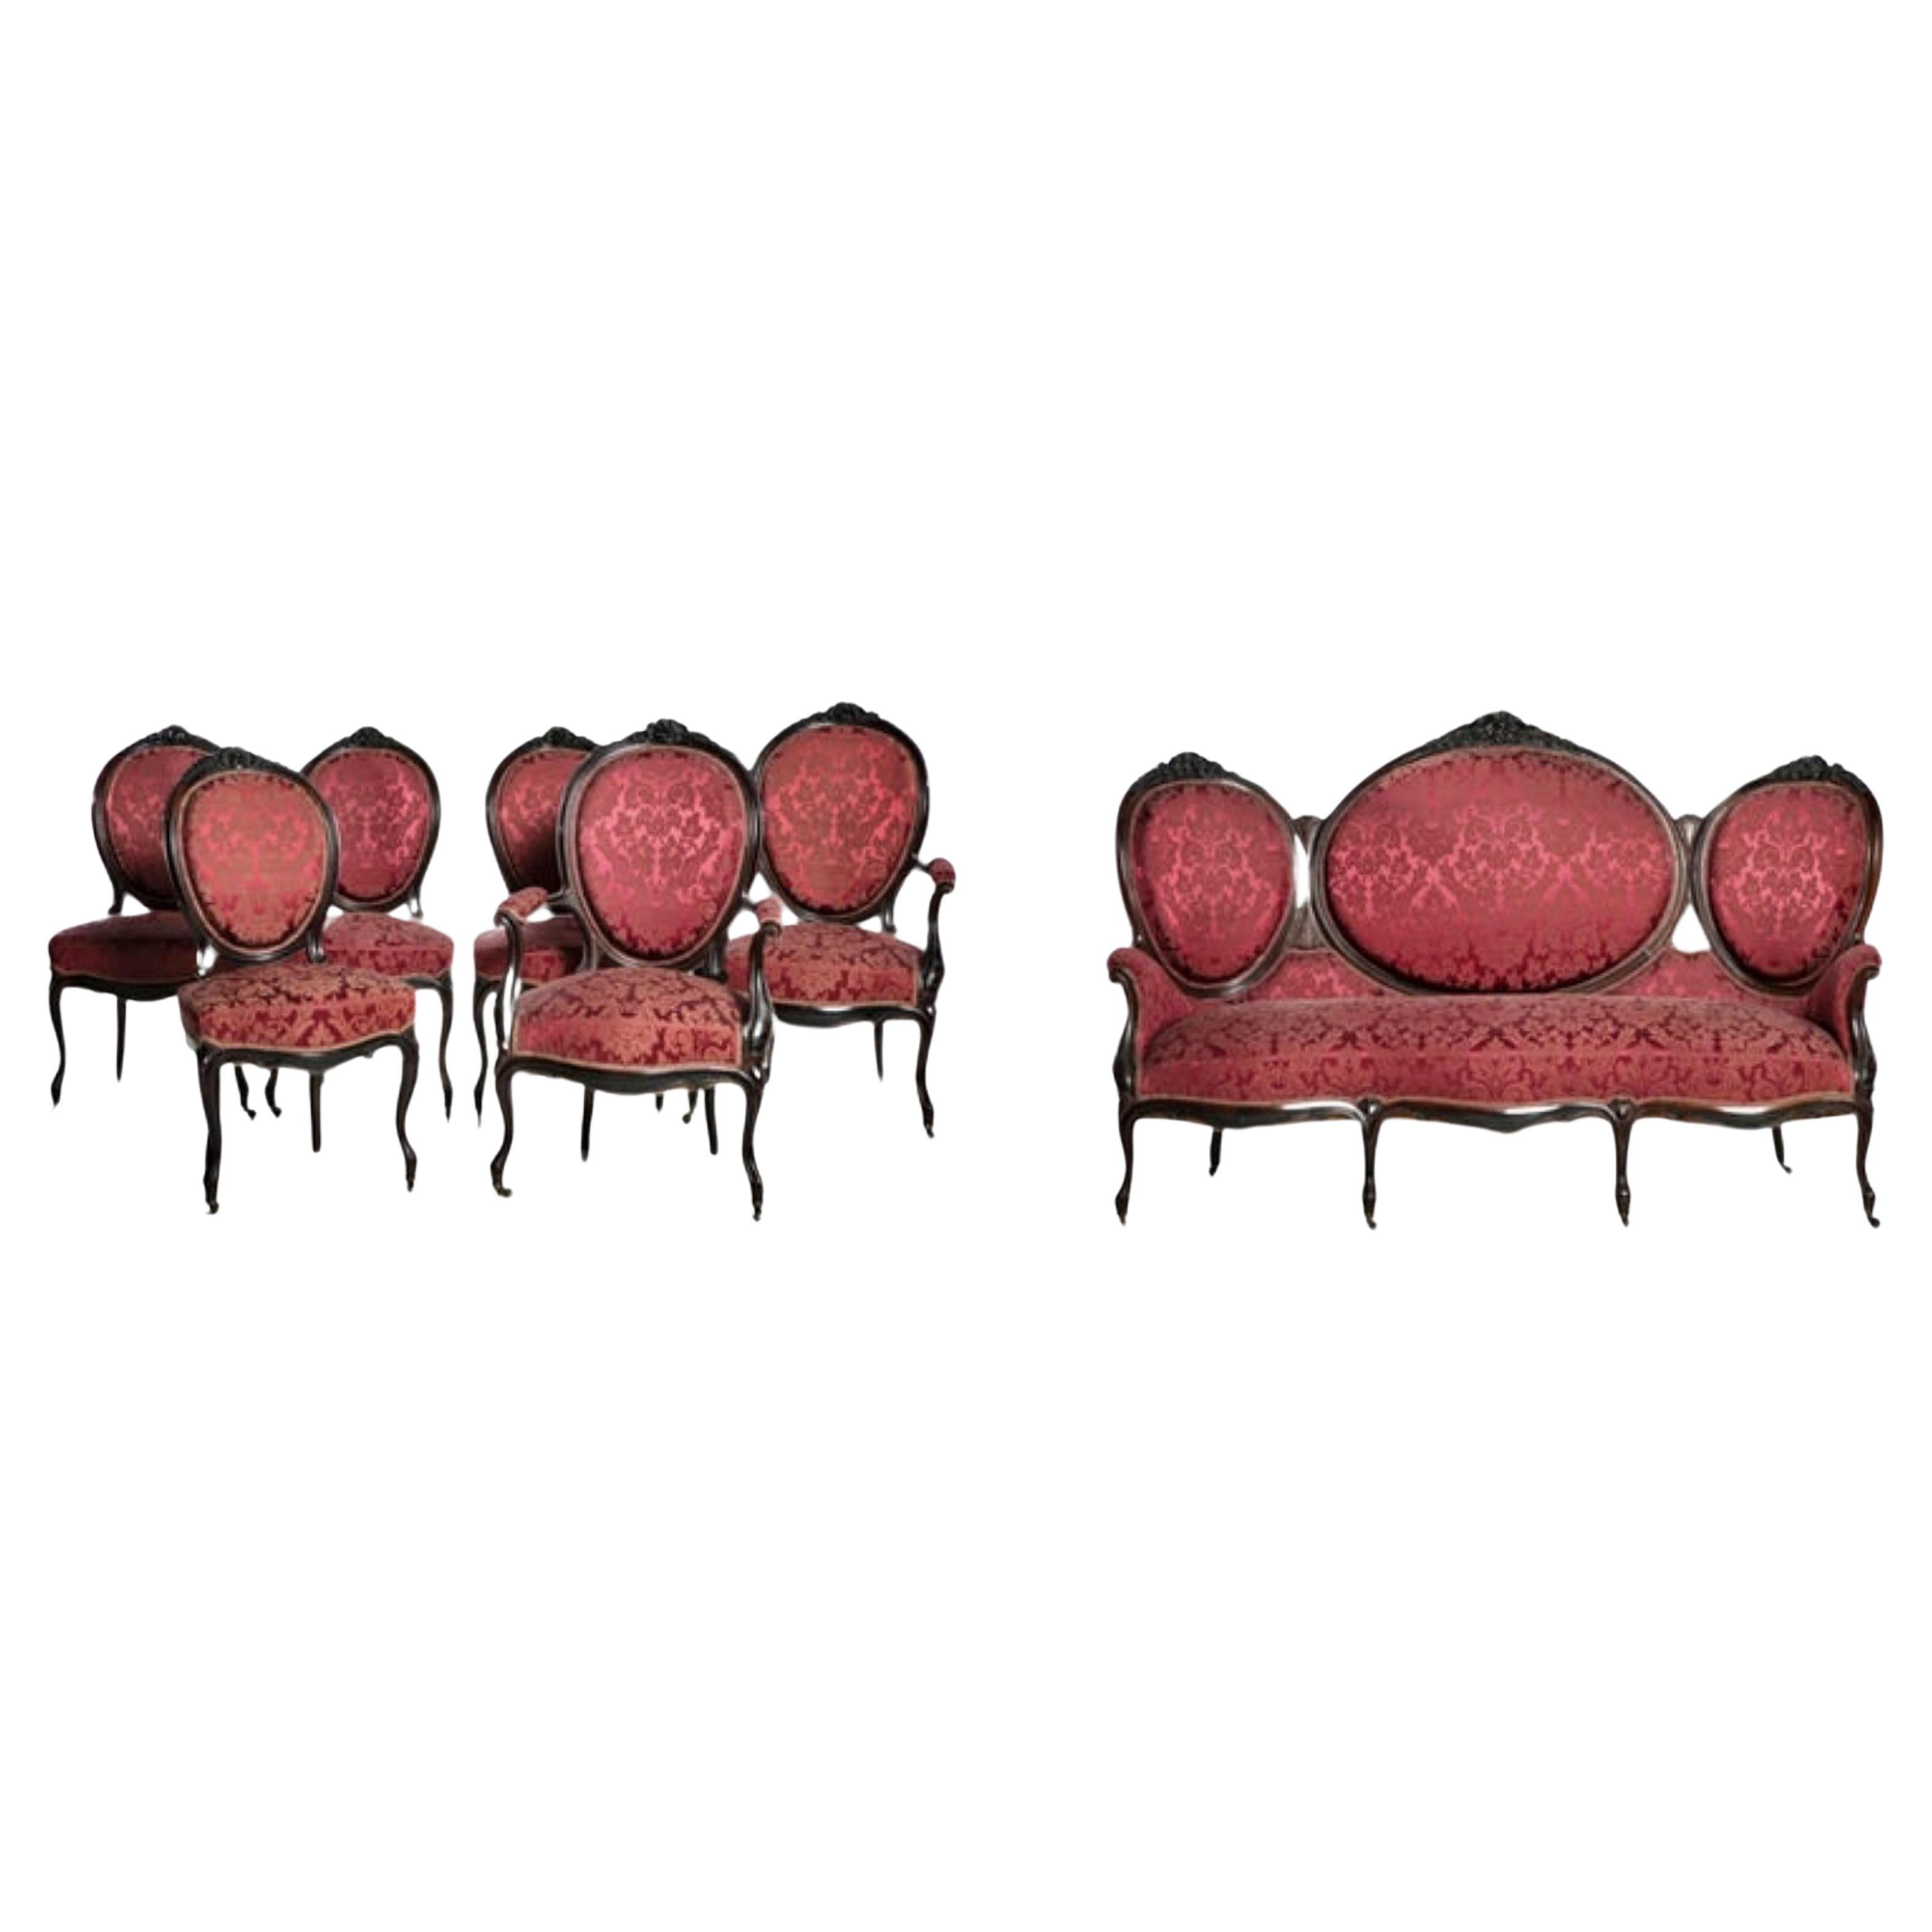 Canape Set Two Armchairs and Four Chairs, Portuguese, 19th Century For Sale